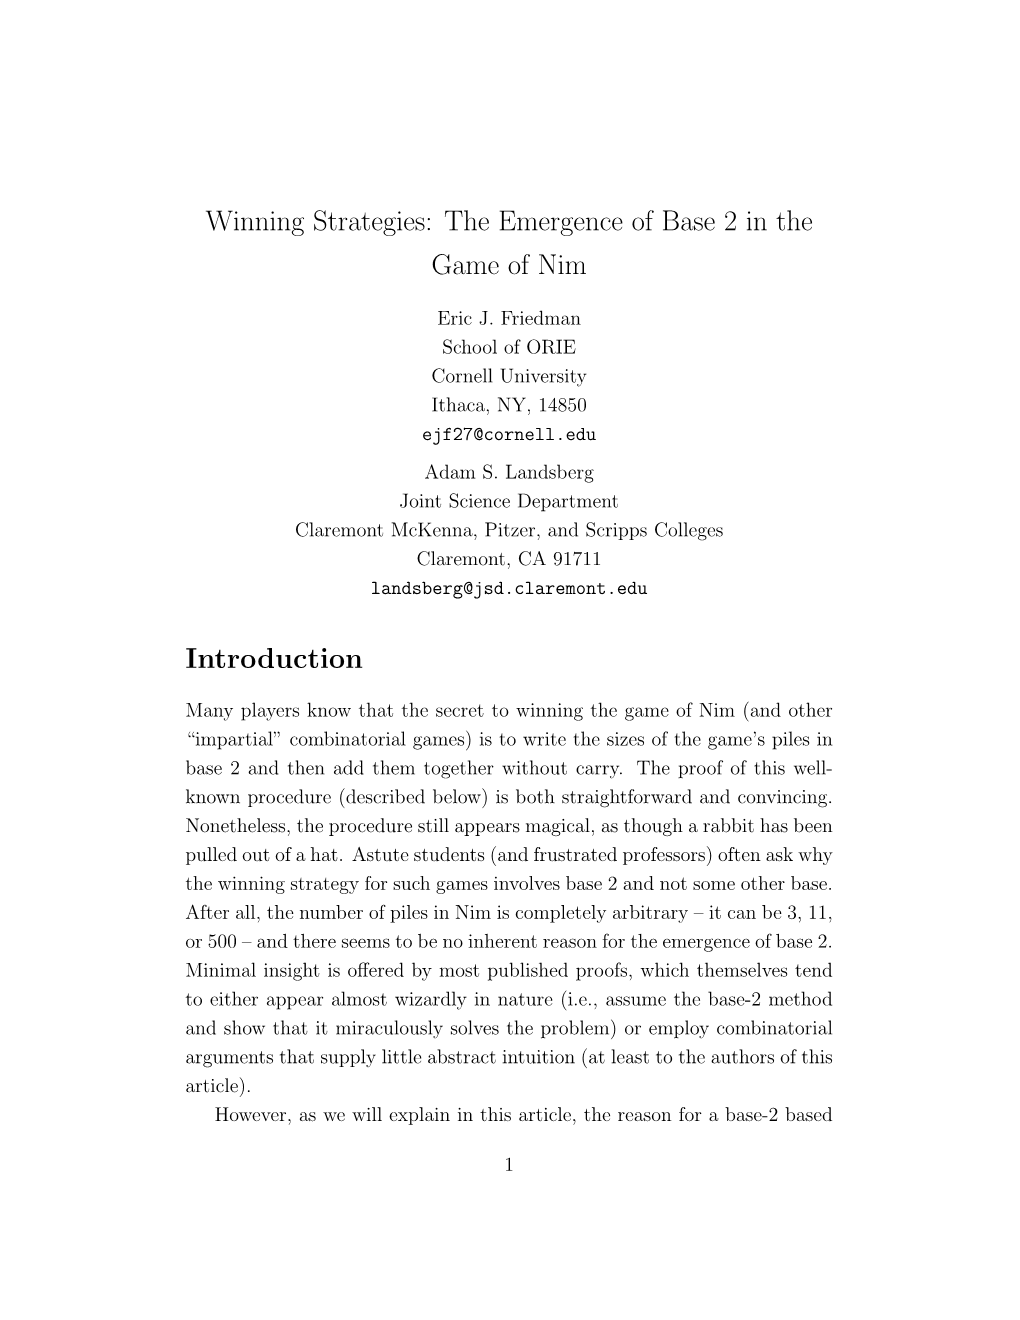 Winning Strategies: the Emergence of Base 2 in the Game of Nim Introduction